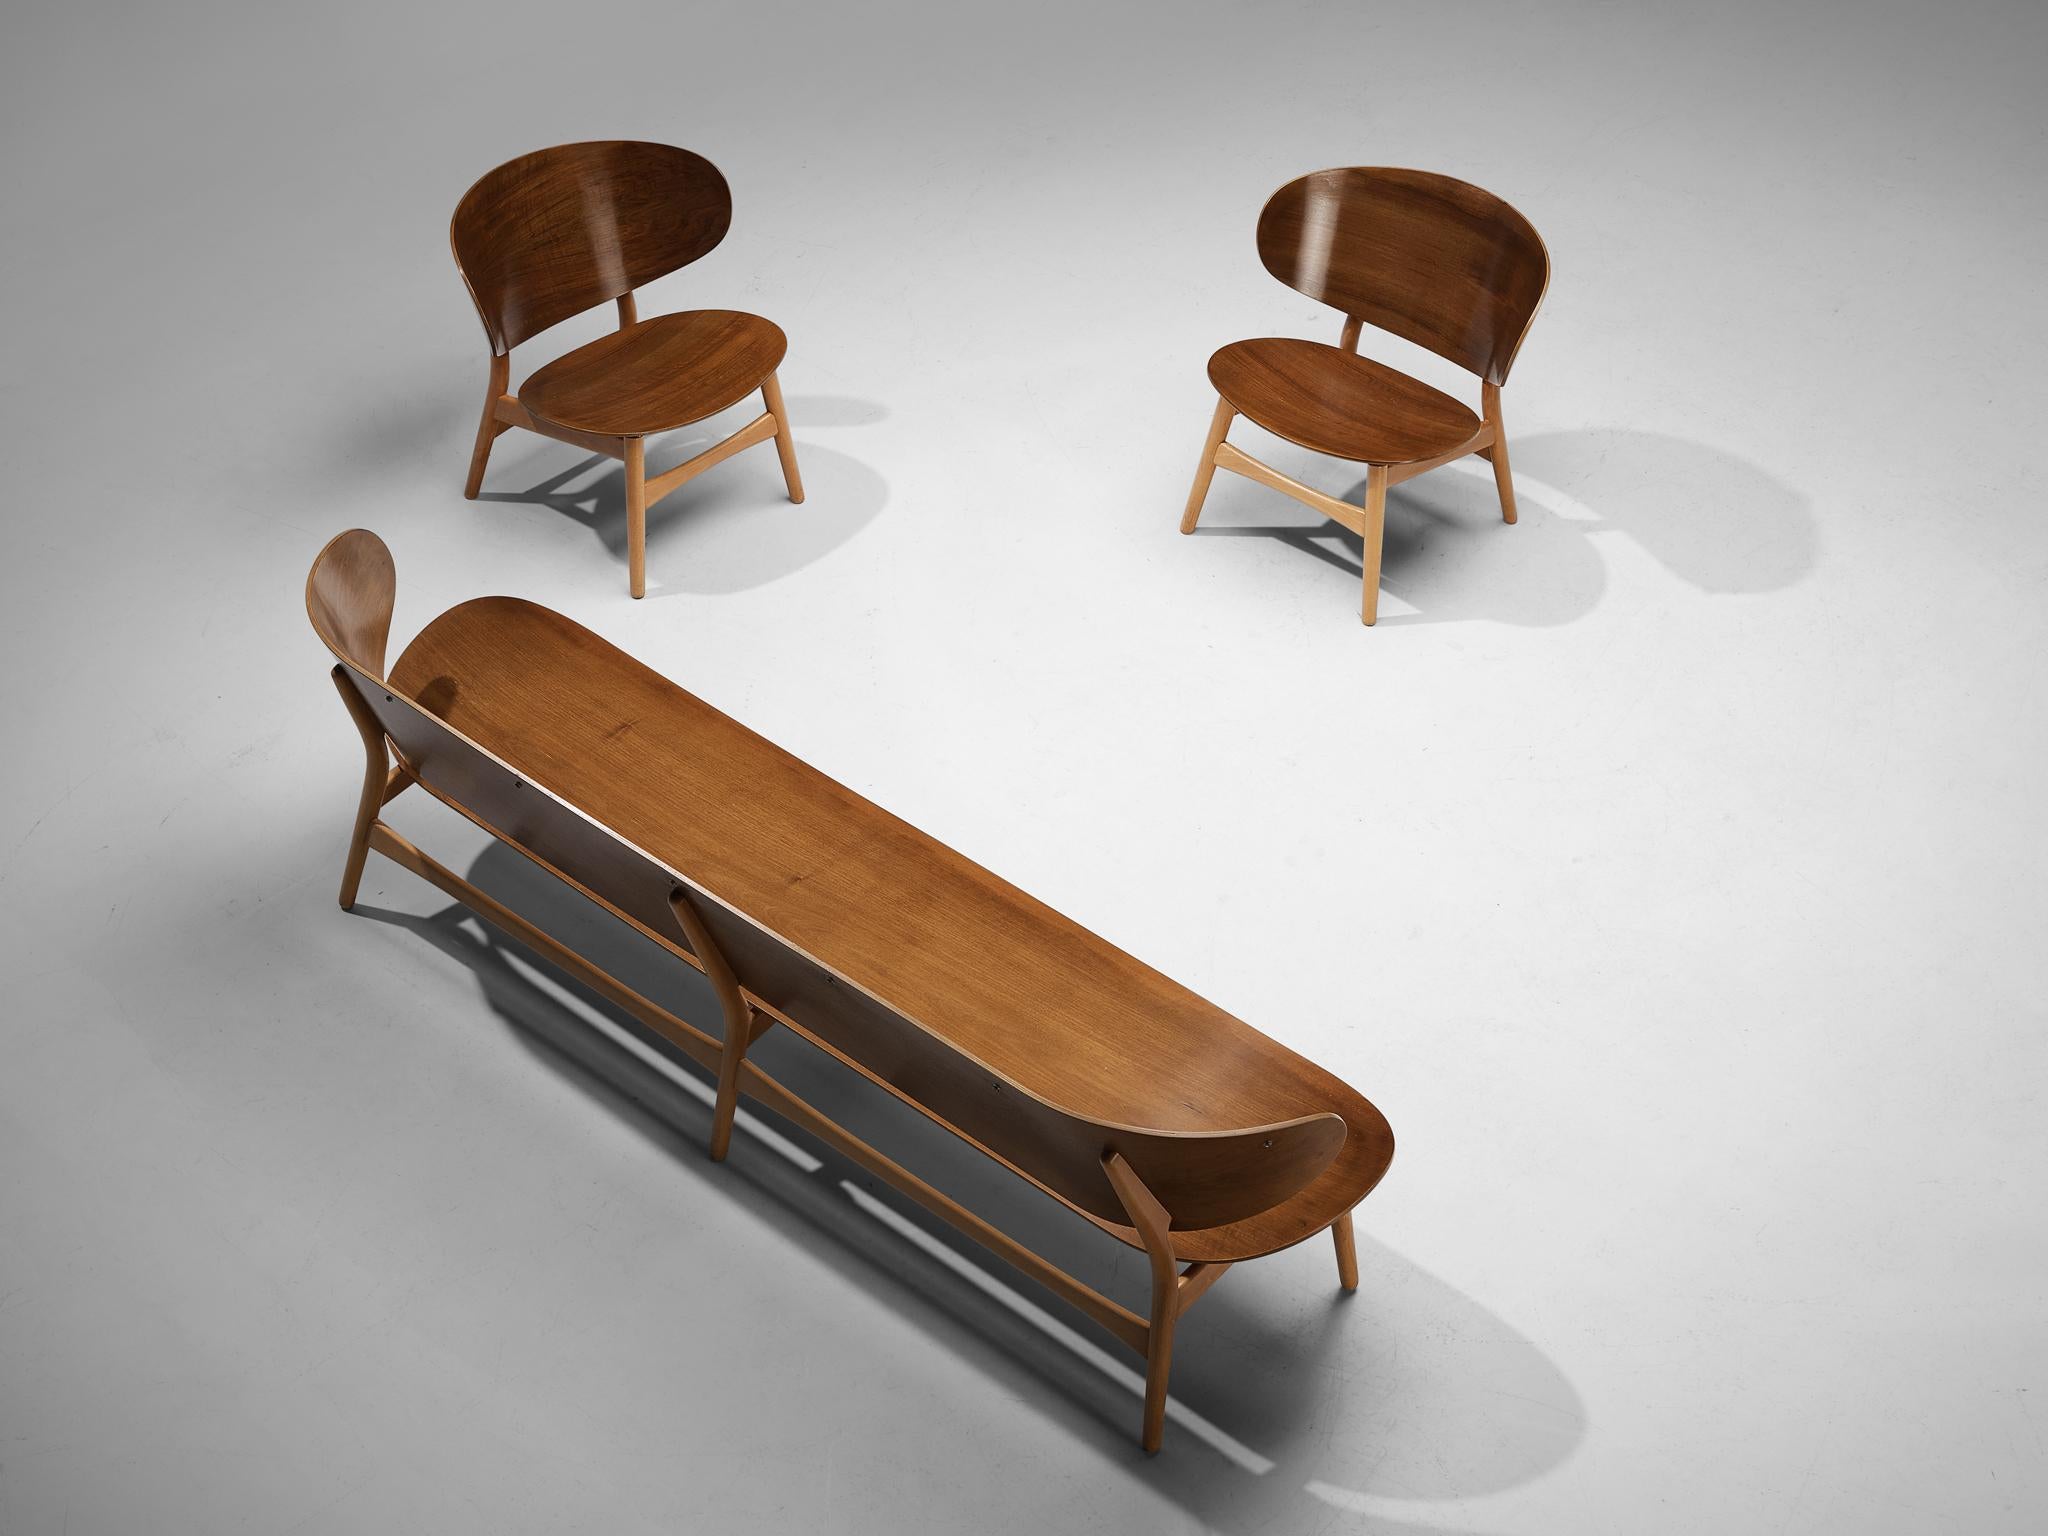 Hans J. Wegner for Fritz Hansen, sofa bench model 'FH 1935/4' and pair of lounge chairs model 'FH 1936', walnut and beech, Denmark, design 1948, manufactured, circa 1950.

This living room set consists of two 'FH 1936' lounge chairs and a 'FH